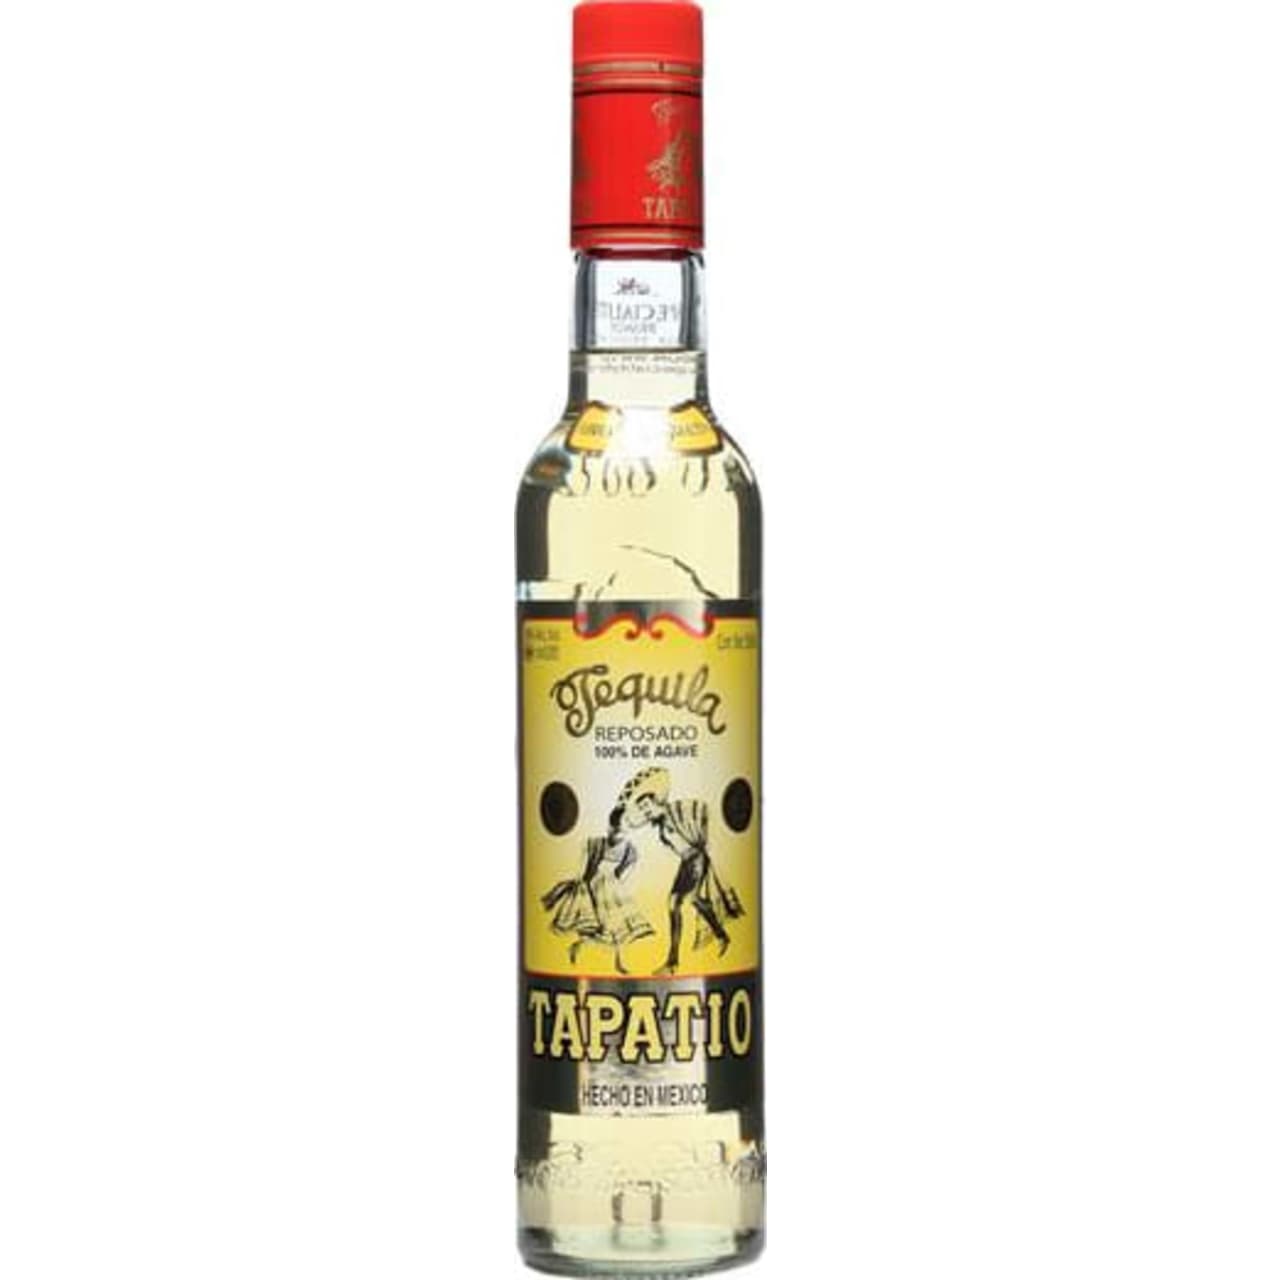 Tapatio Reposado Tequila is produced at La Altena distillery by master distiller, Carlos Camarena. This is a much more restrained tequila than the Tapatio Blanco and has been aged for four months in ex-bourbon casks.